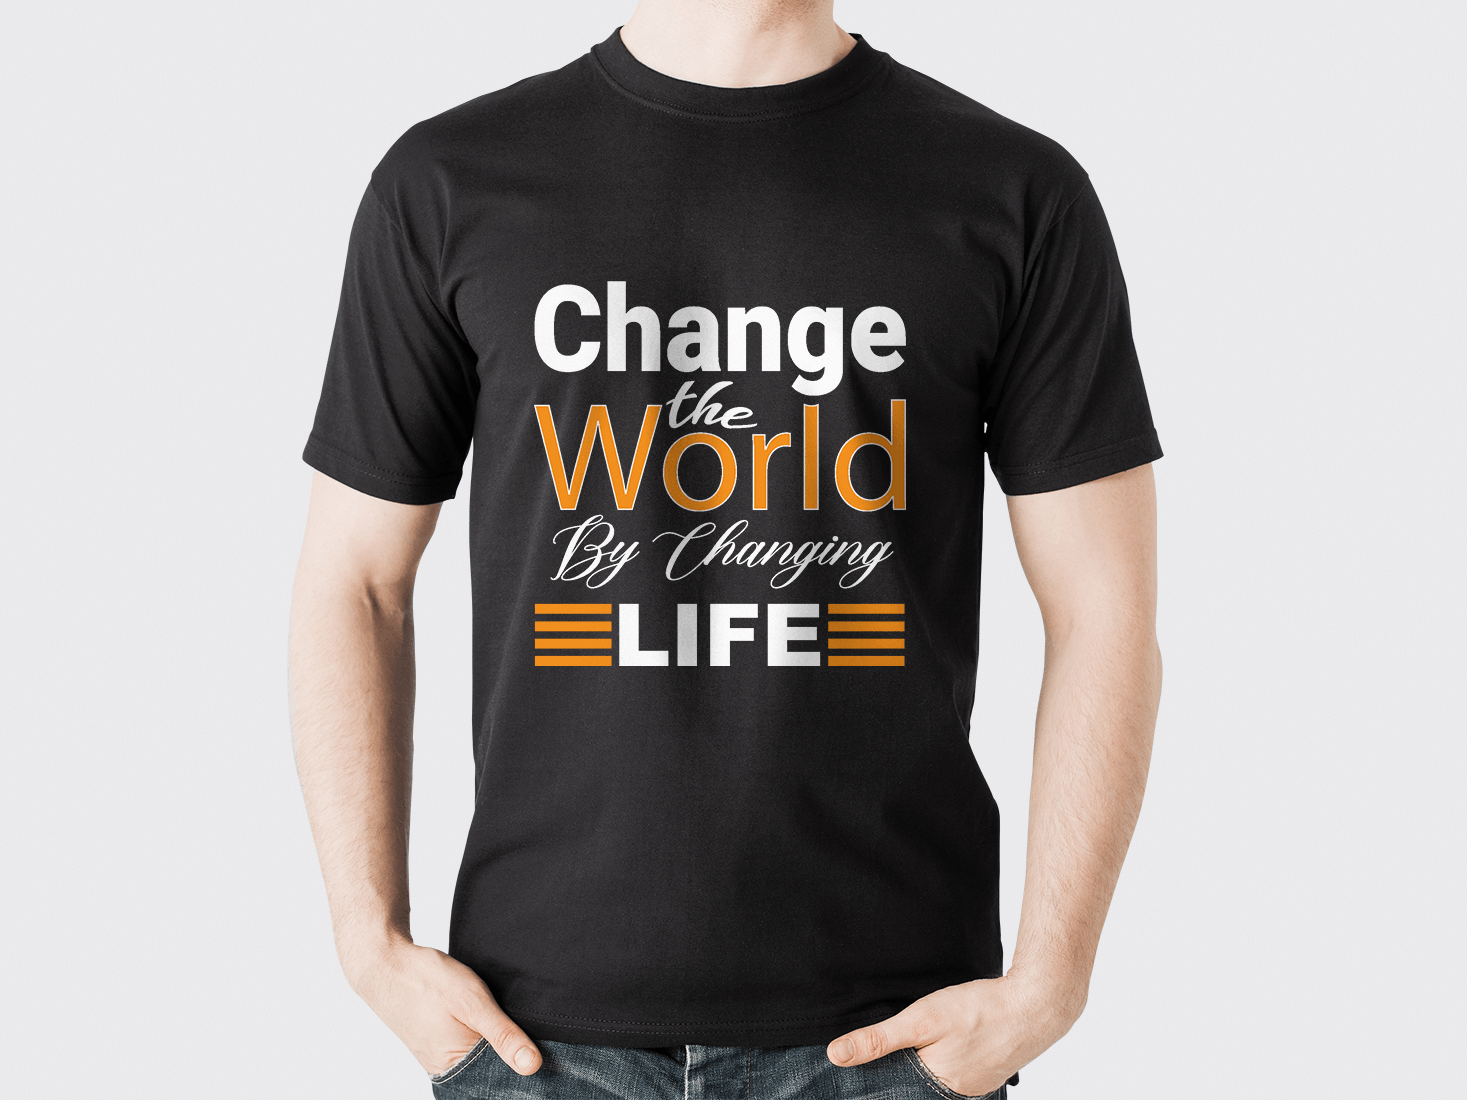 Man wearing a black t - shirt that says change the world by changing life.